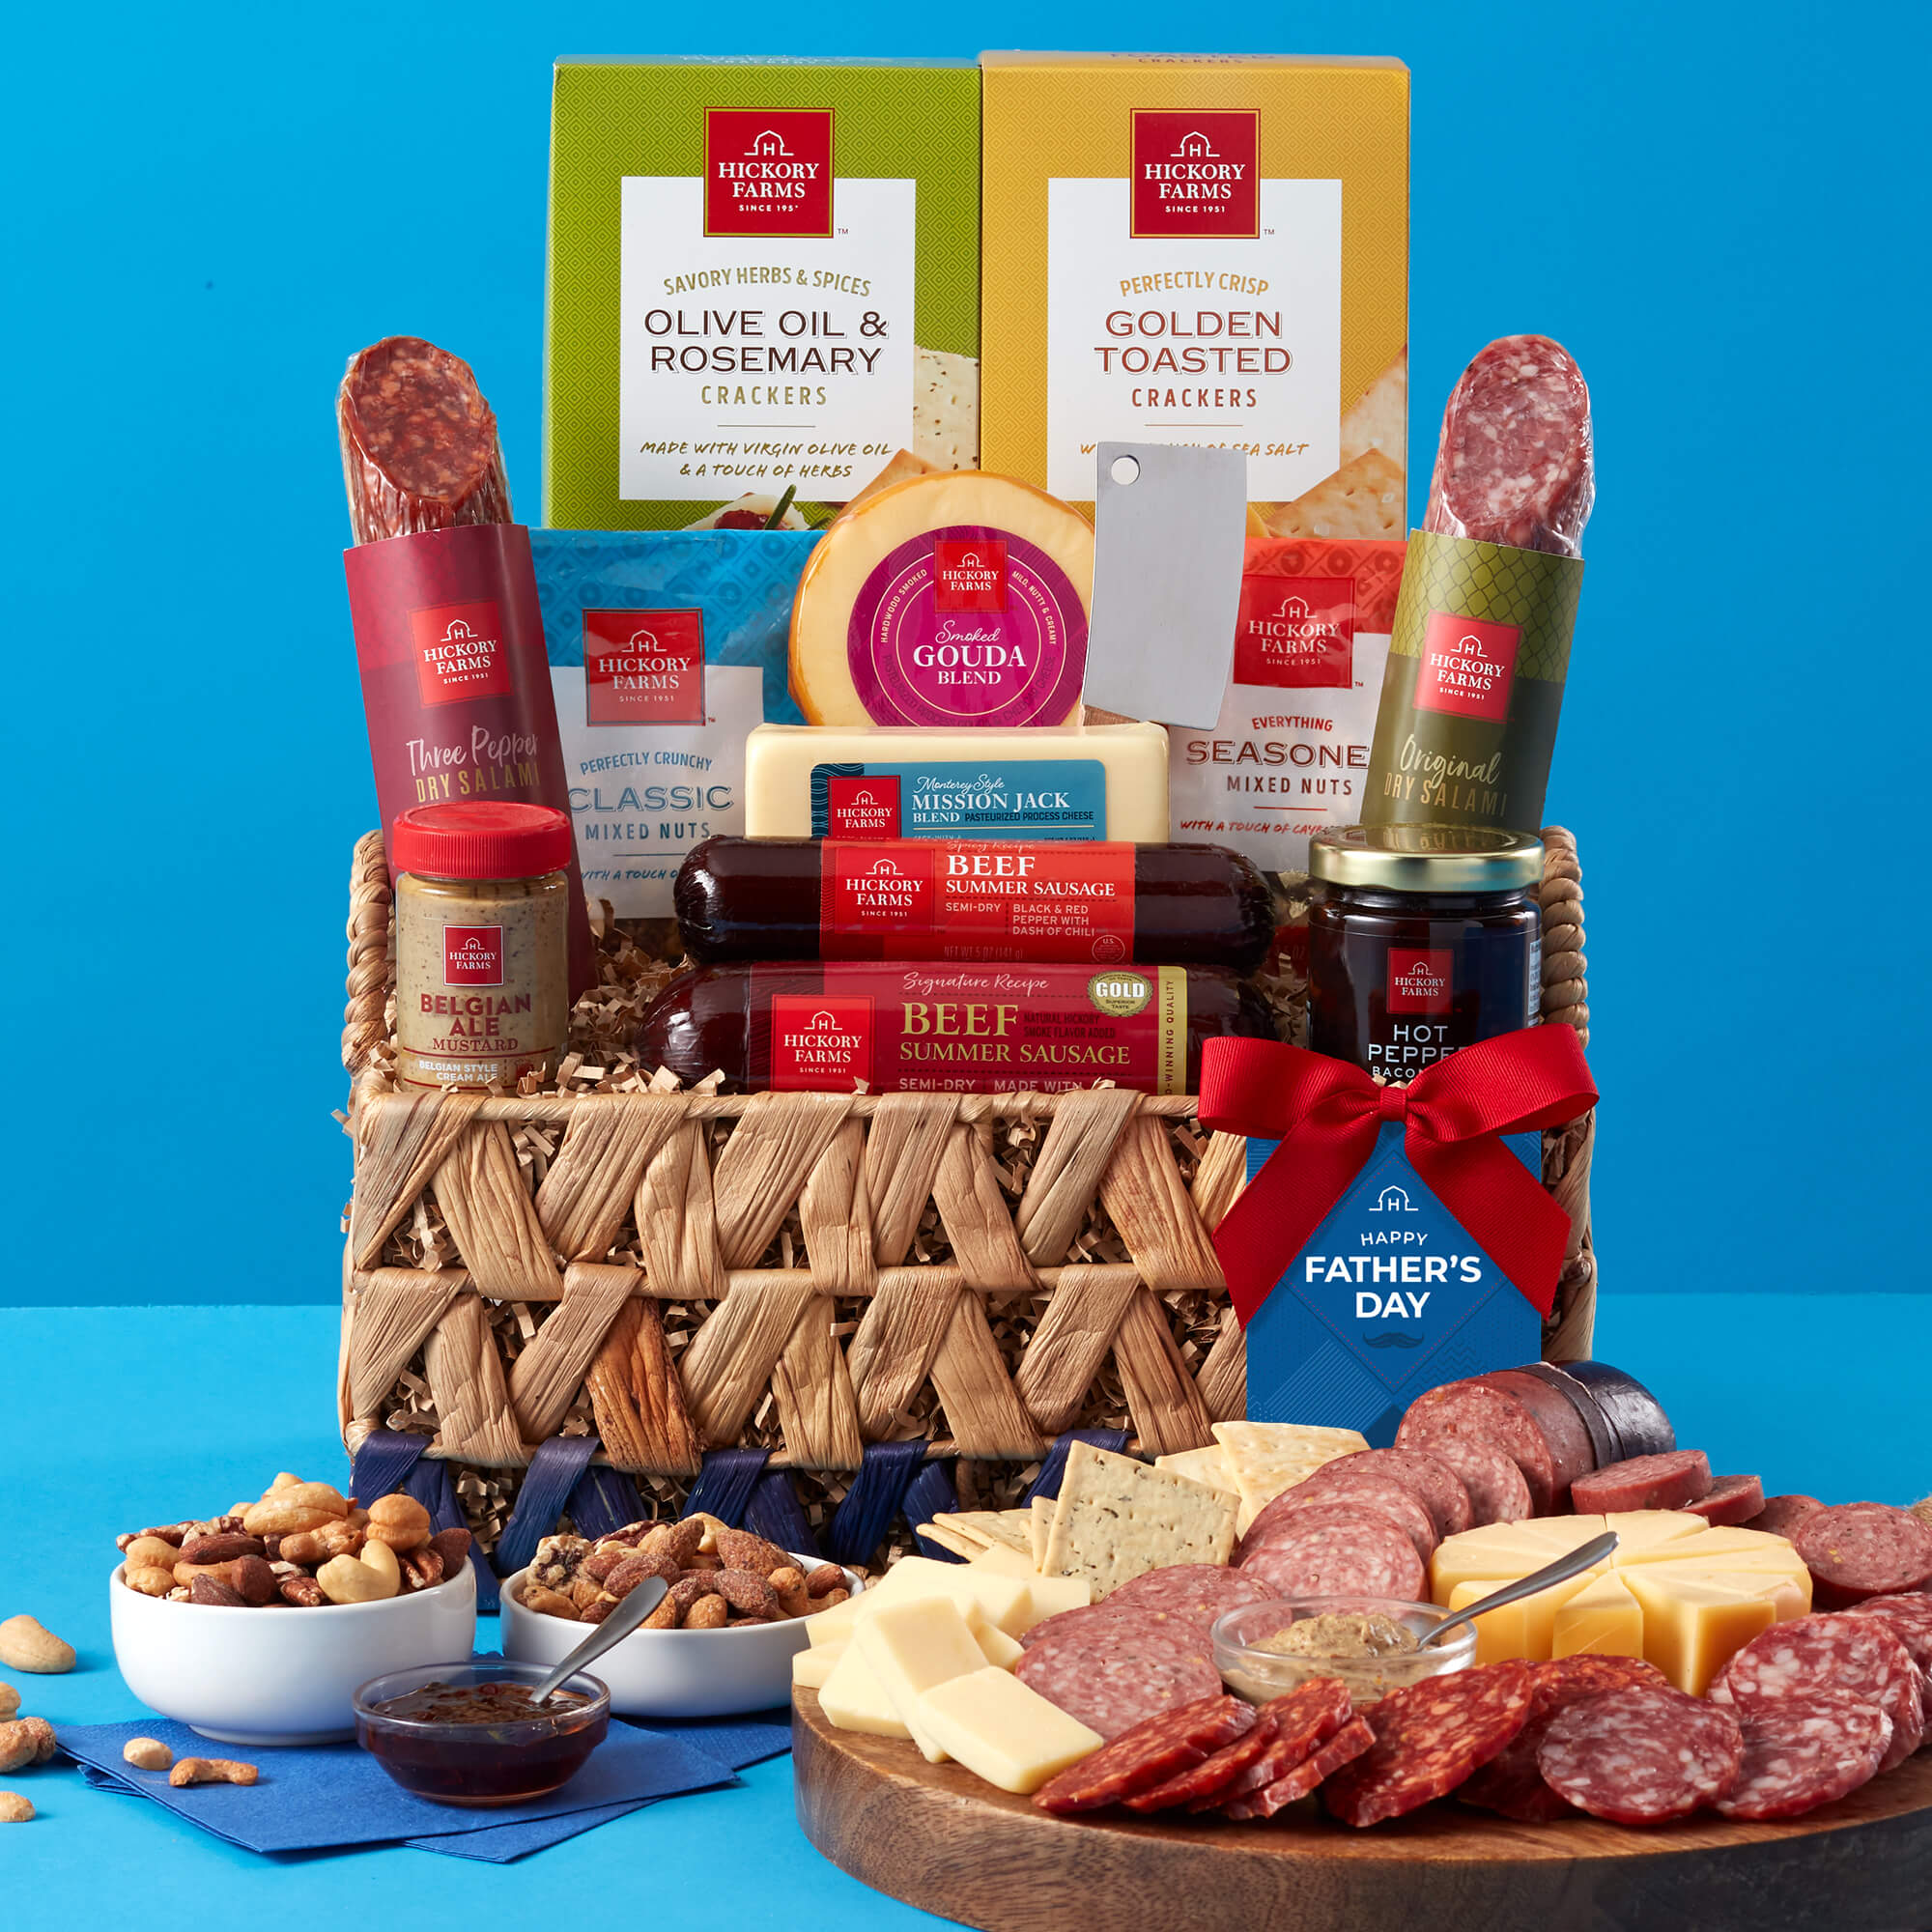 A gift basket filled with summer sausage, cheese, snacks, and sweets on a blue background